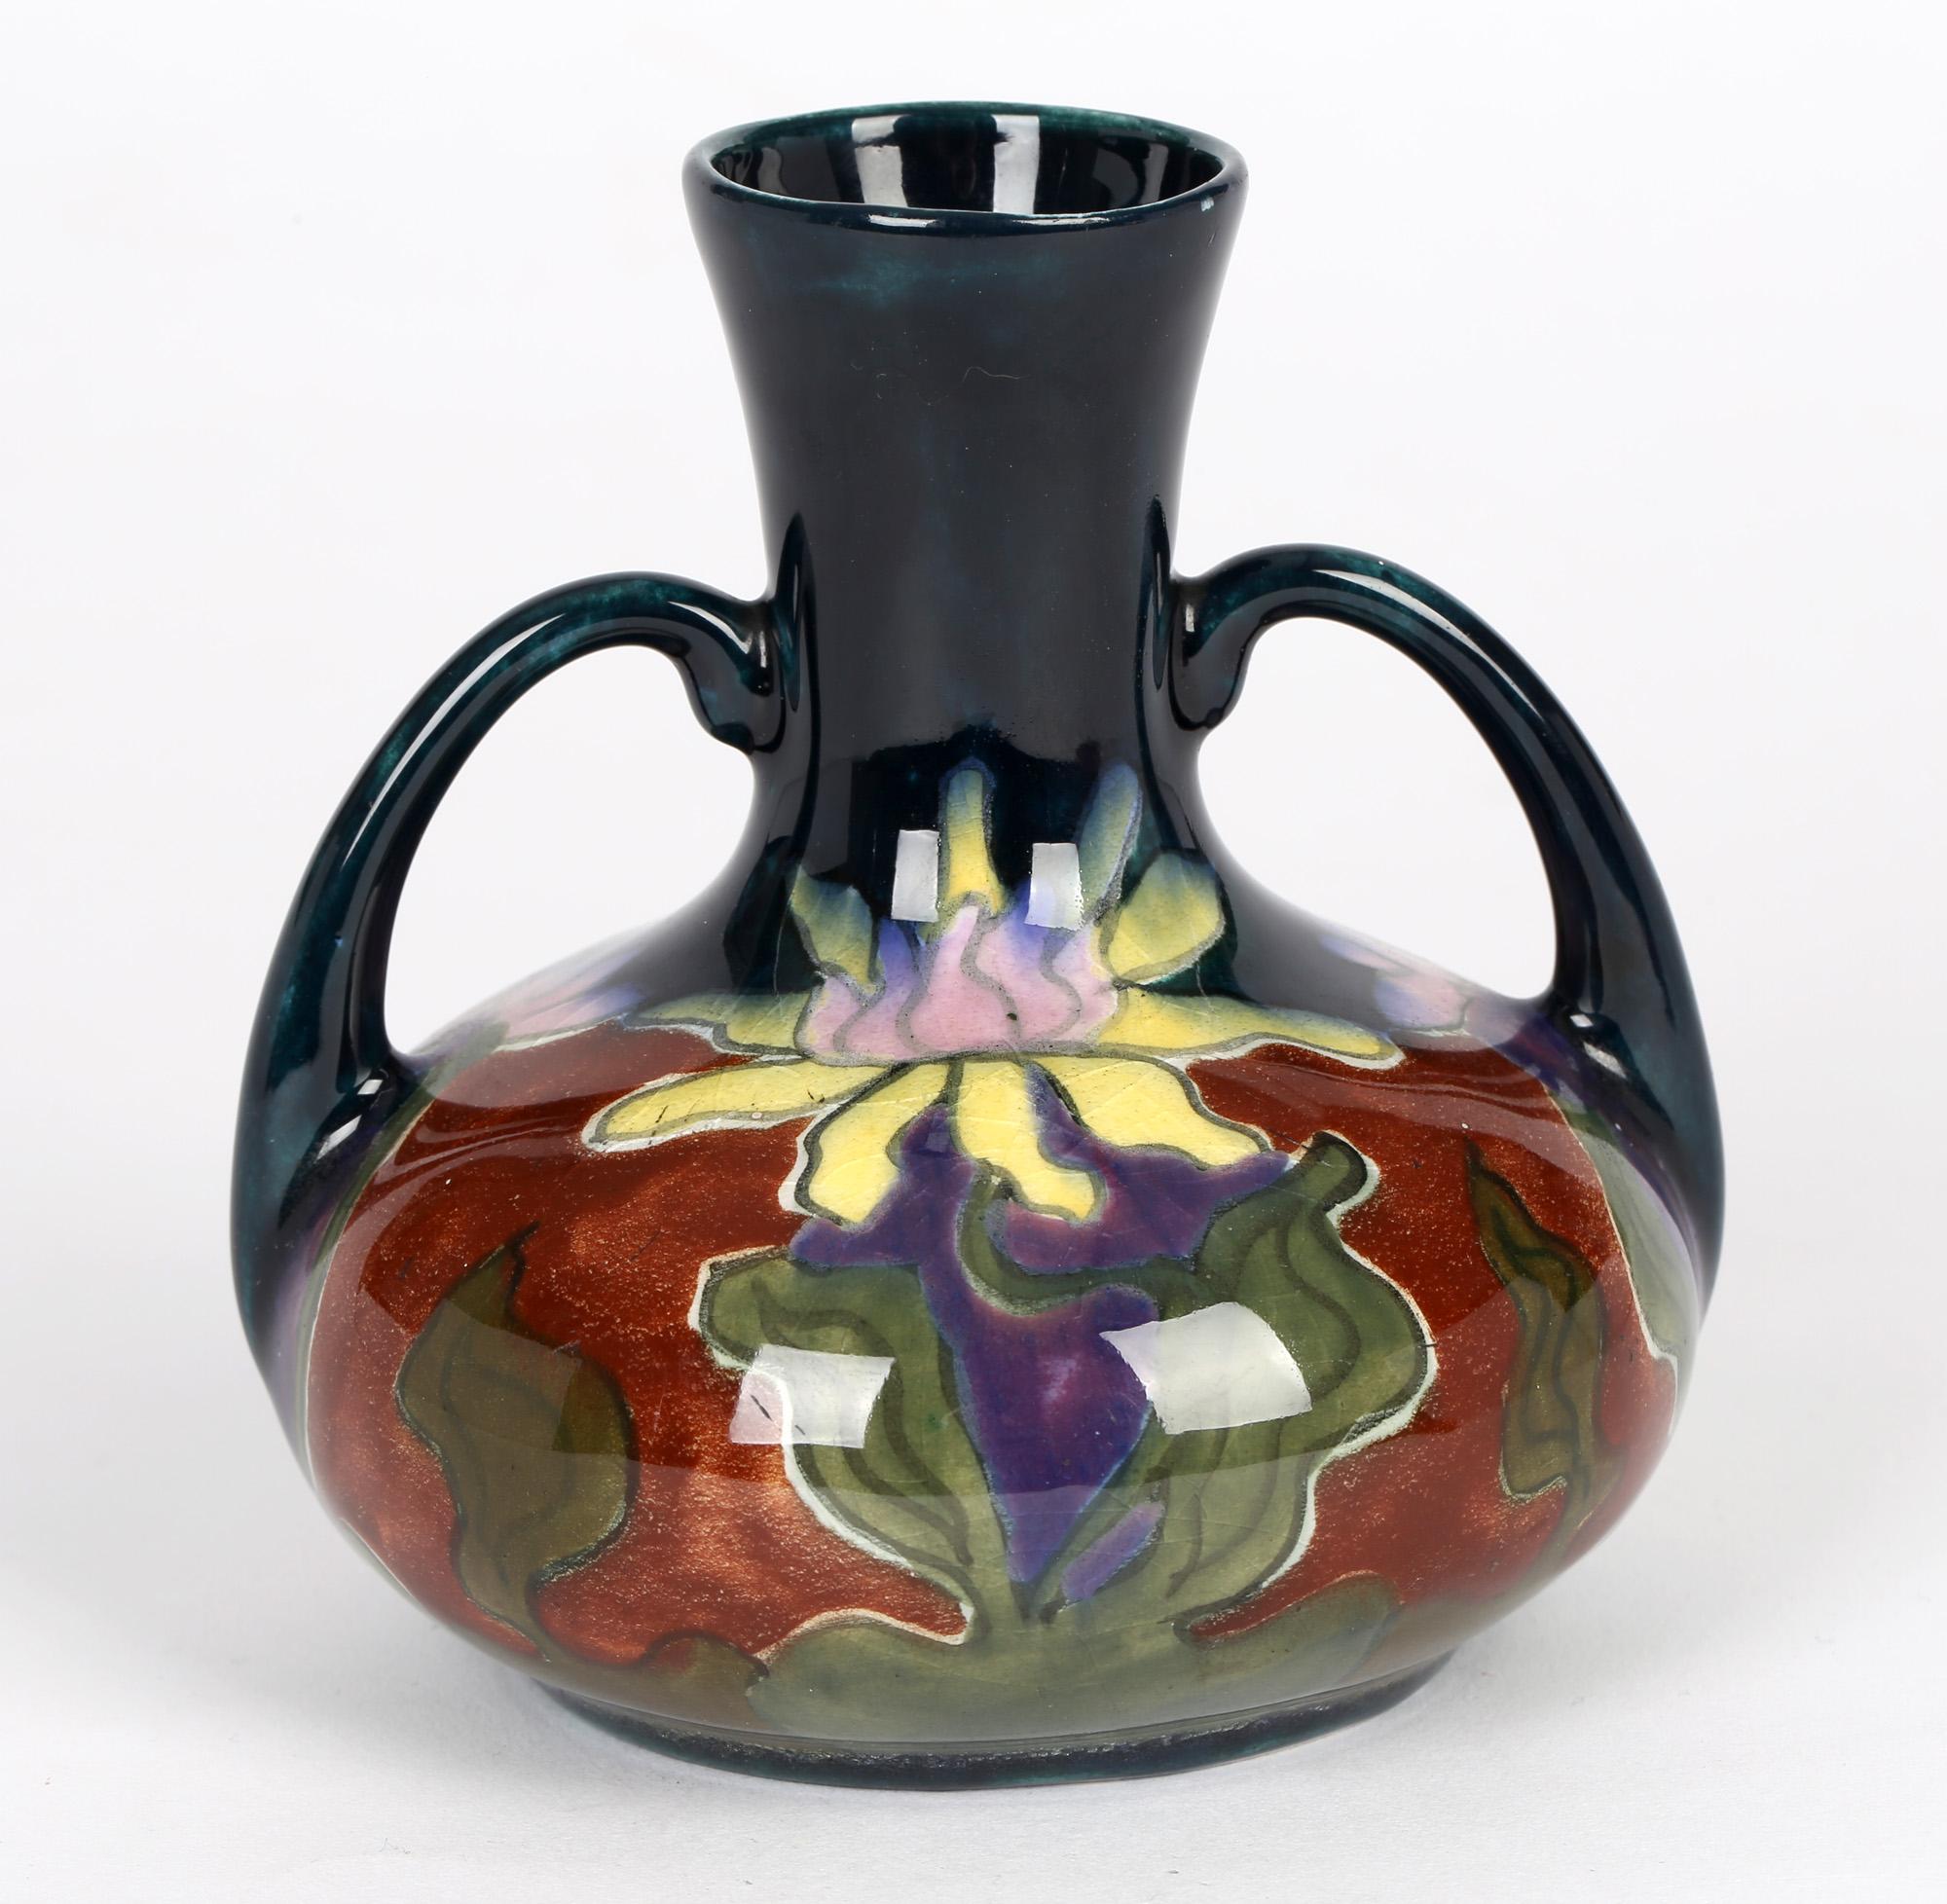 A stylish Austrian Art Nouveau twin handled art pottery vase hand painted with floral designs and made at Old Moravian Pottery around 1906. The squat rounded vase is lightly potted and hand decorated in colored enamels with painted marks to the base